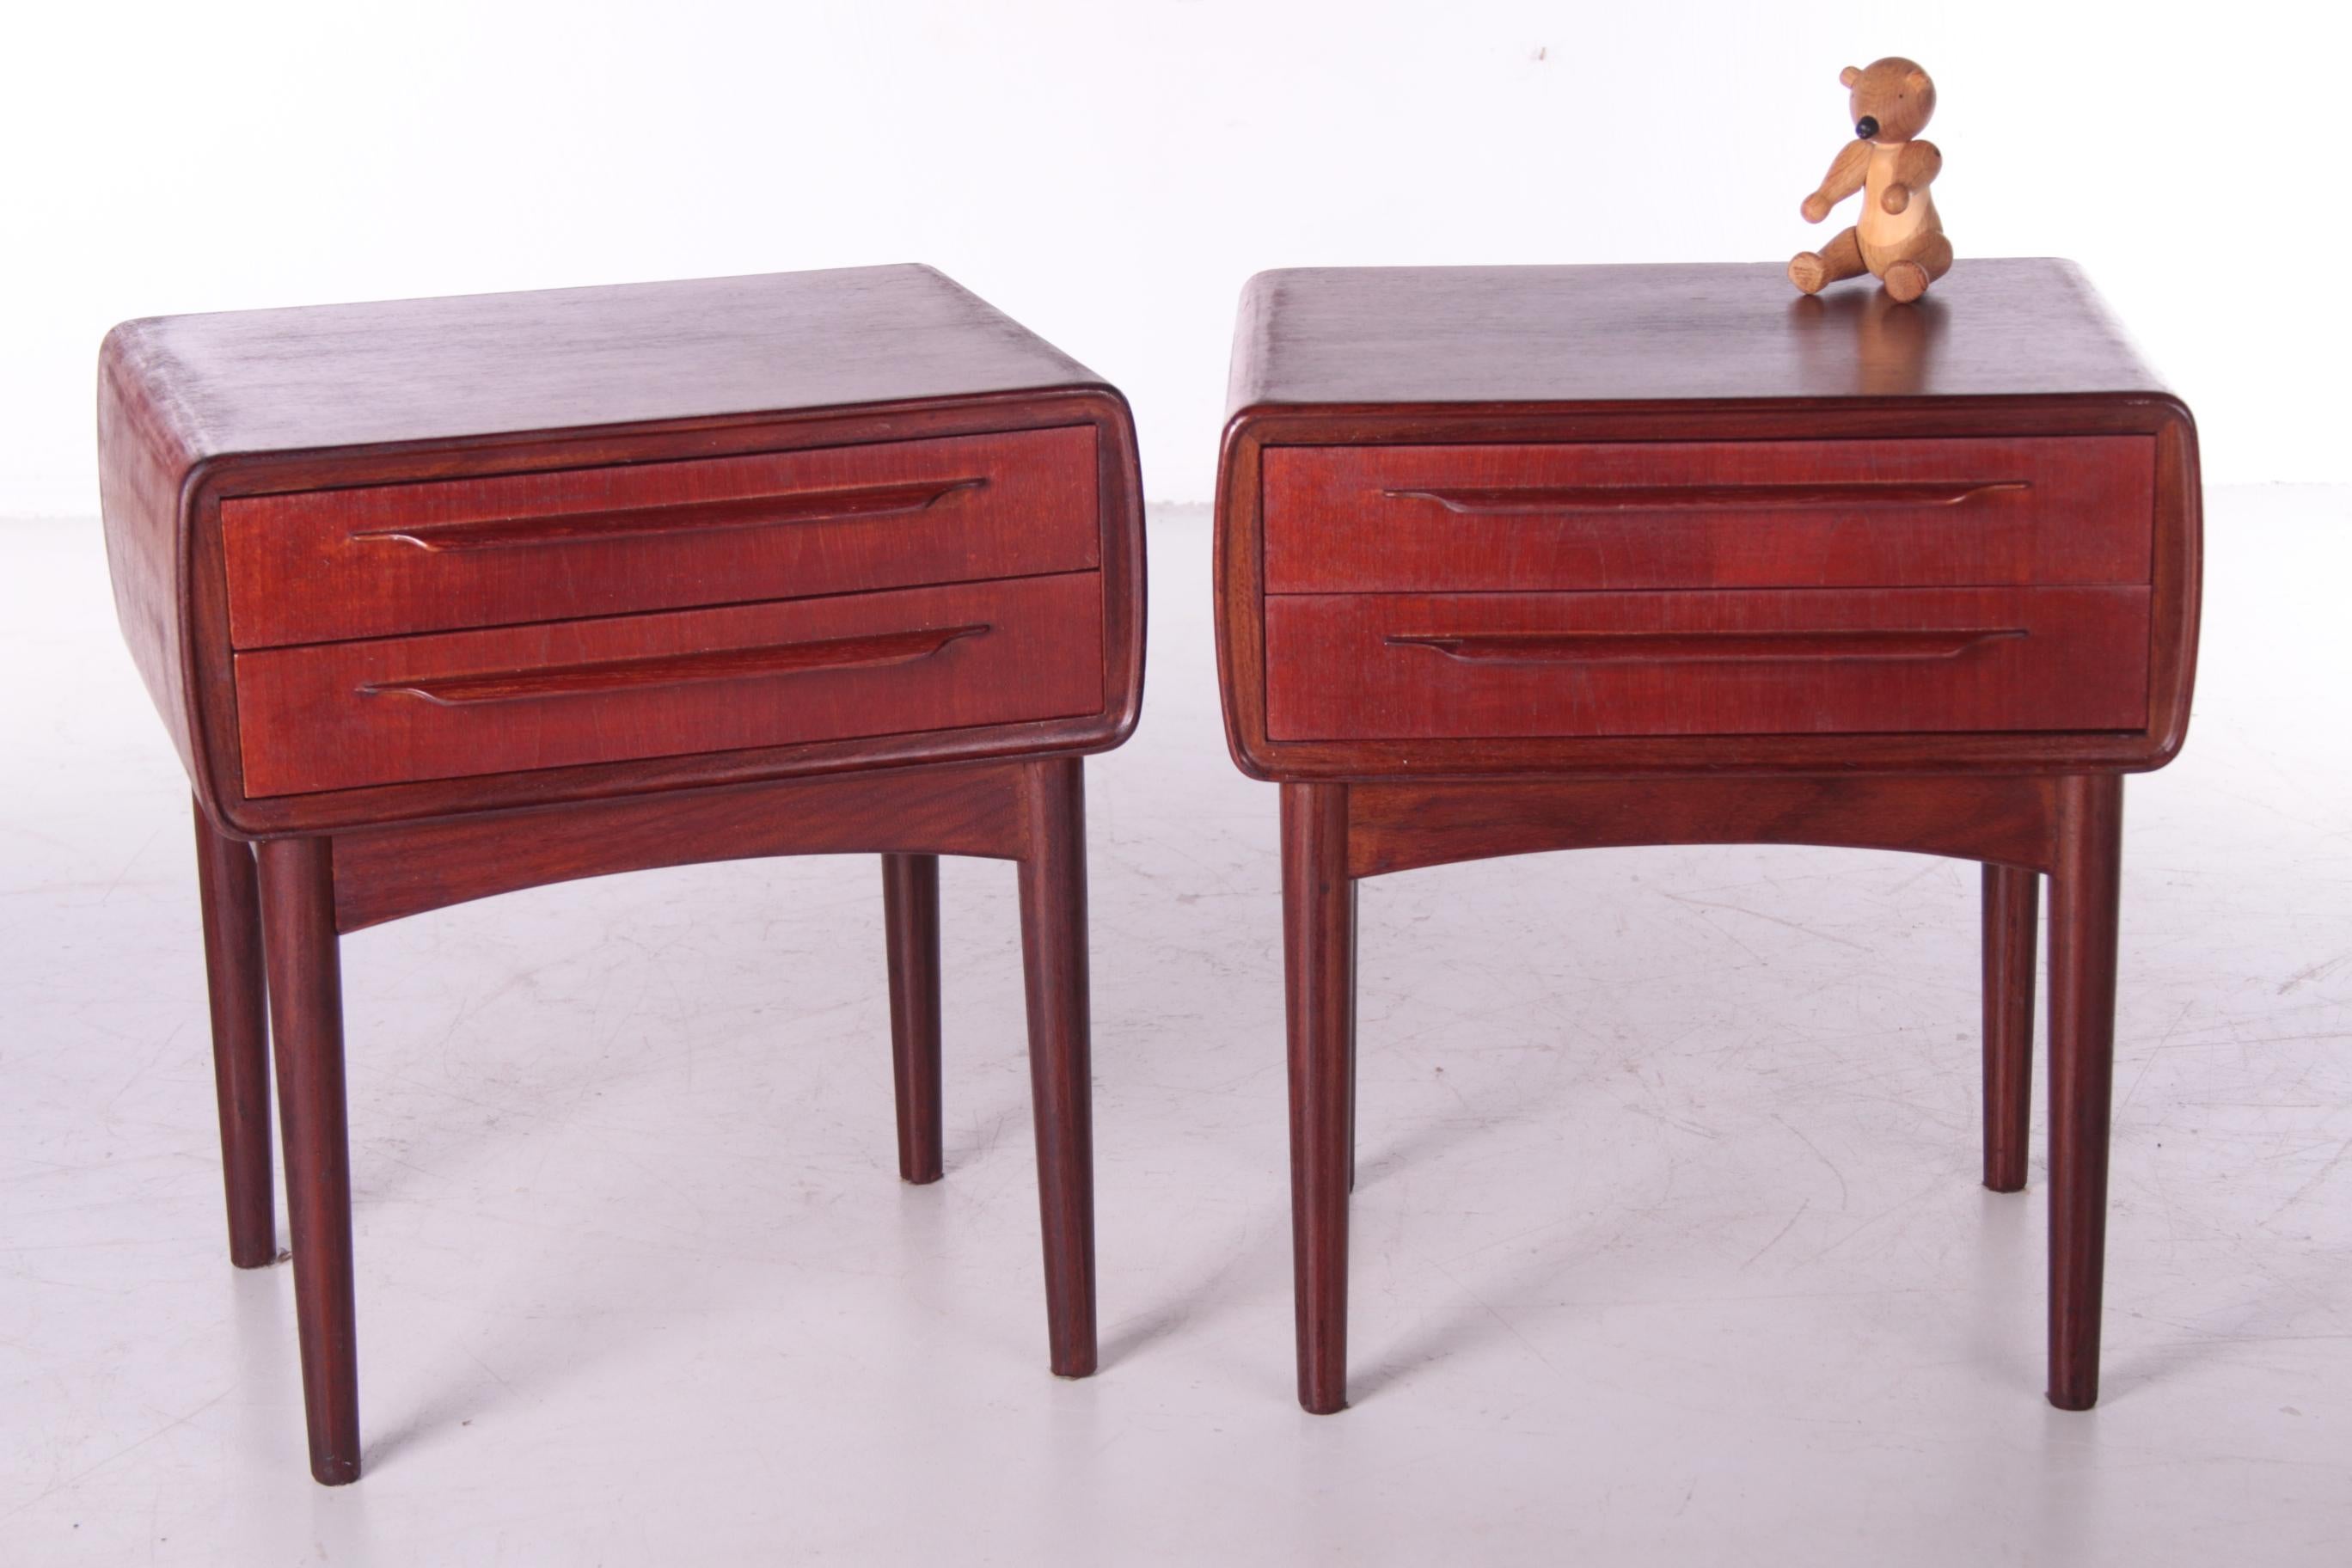 Set of Danish design bedside tables designed by Johannes Andersen by c.f.Silkeborg, 1960

A very nice original pair like these sought after little round bedside tables, they have a great original patina, look beautiful!

Two beautiful, highly